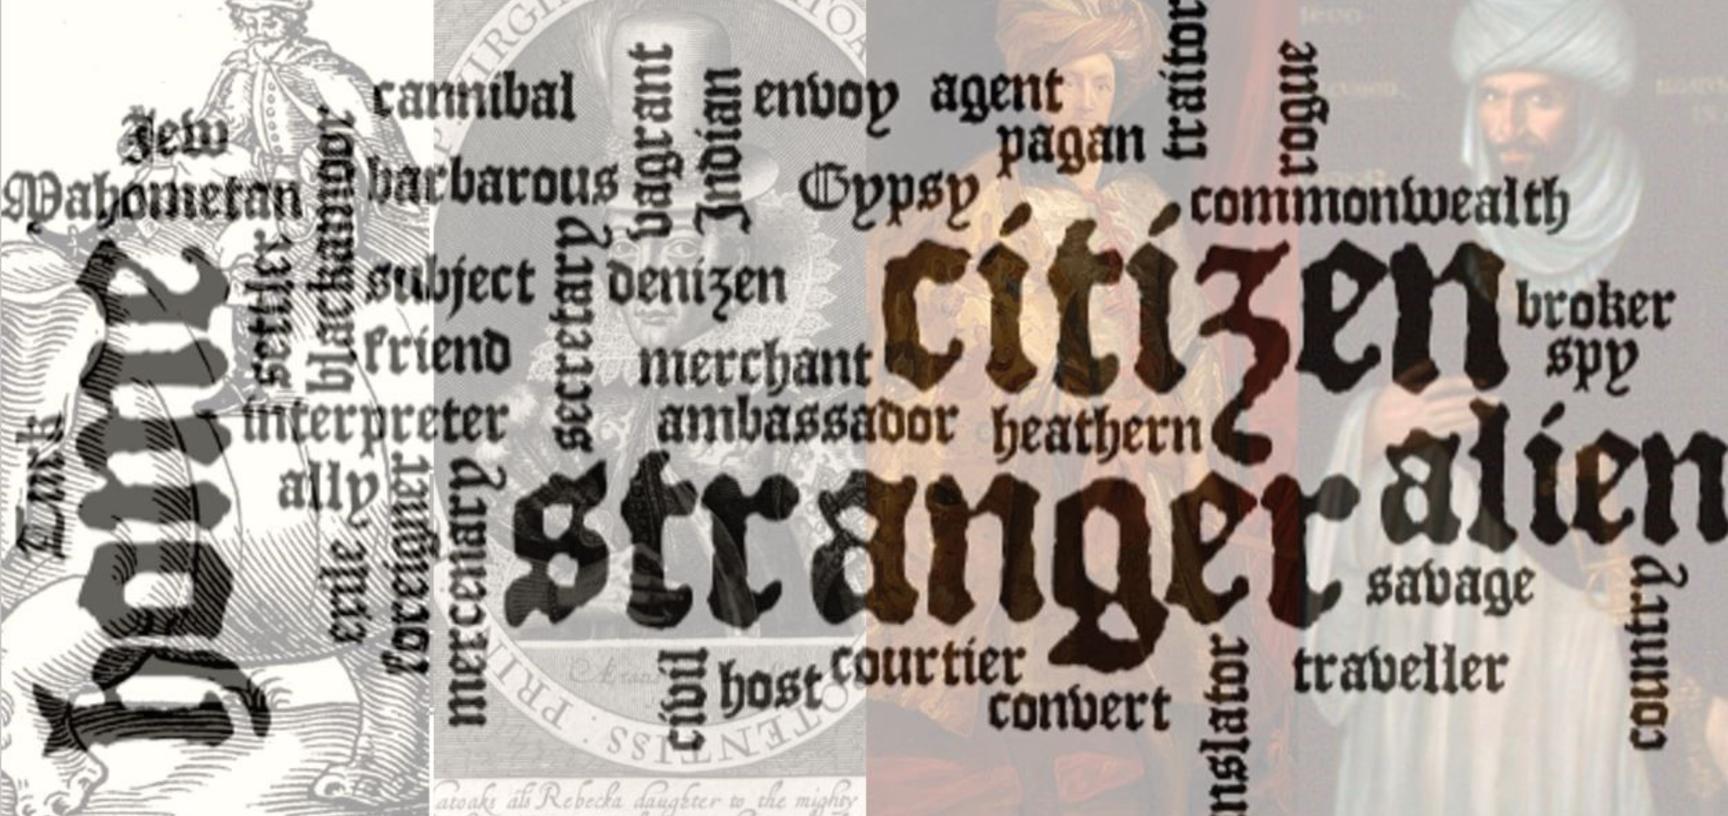 A word cloud illustrating differing concepts of cultural identity in early modern England.